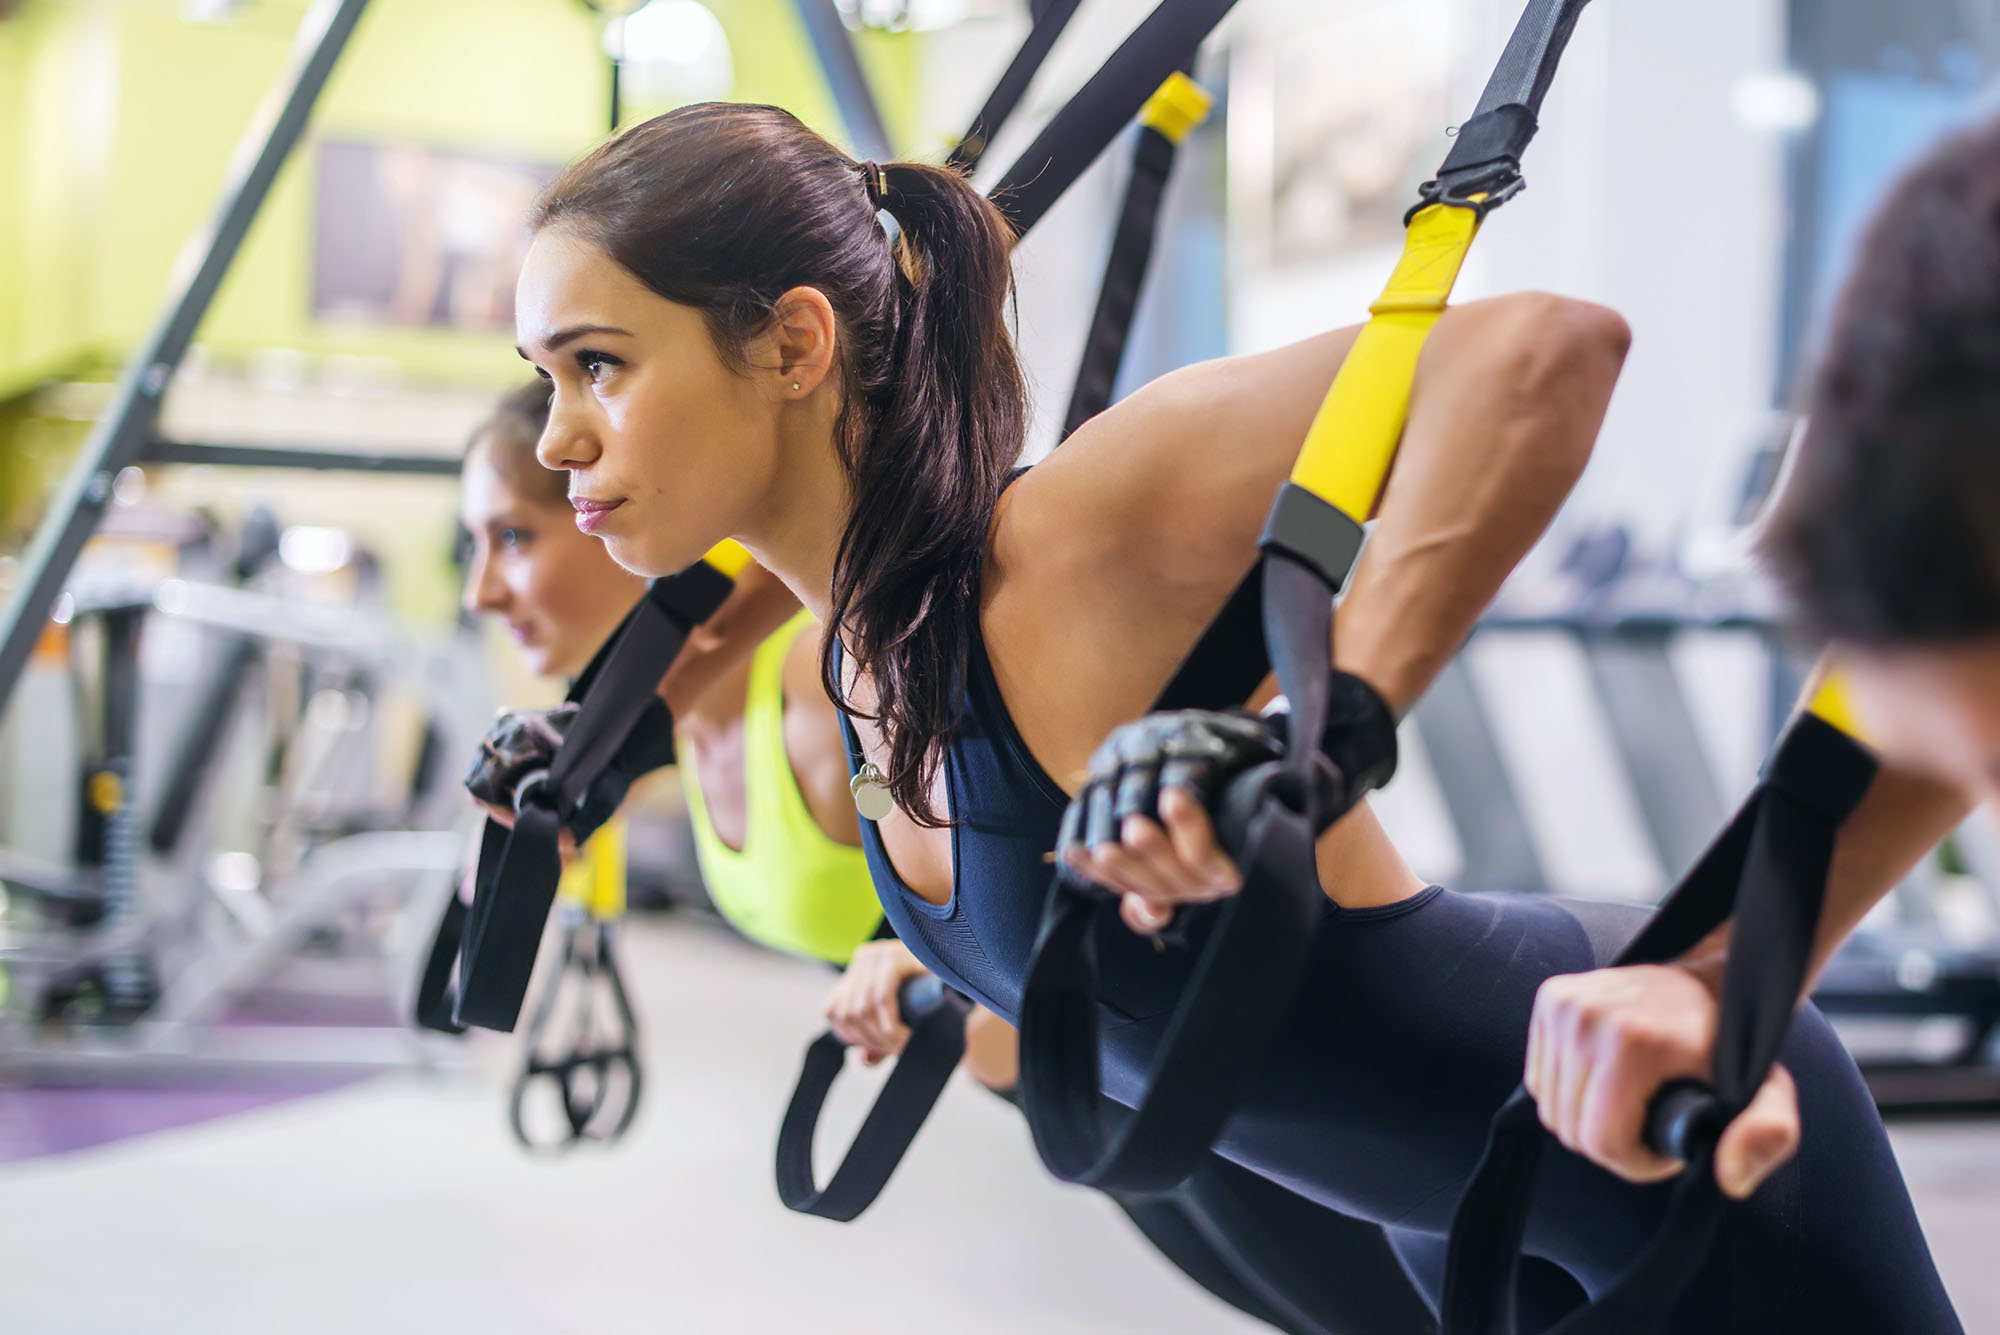 Why is it important to make cross training part of your exercise routine?